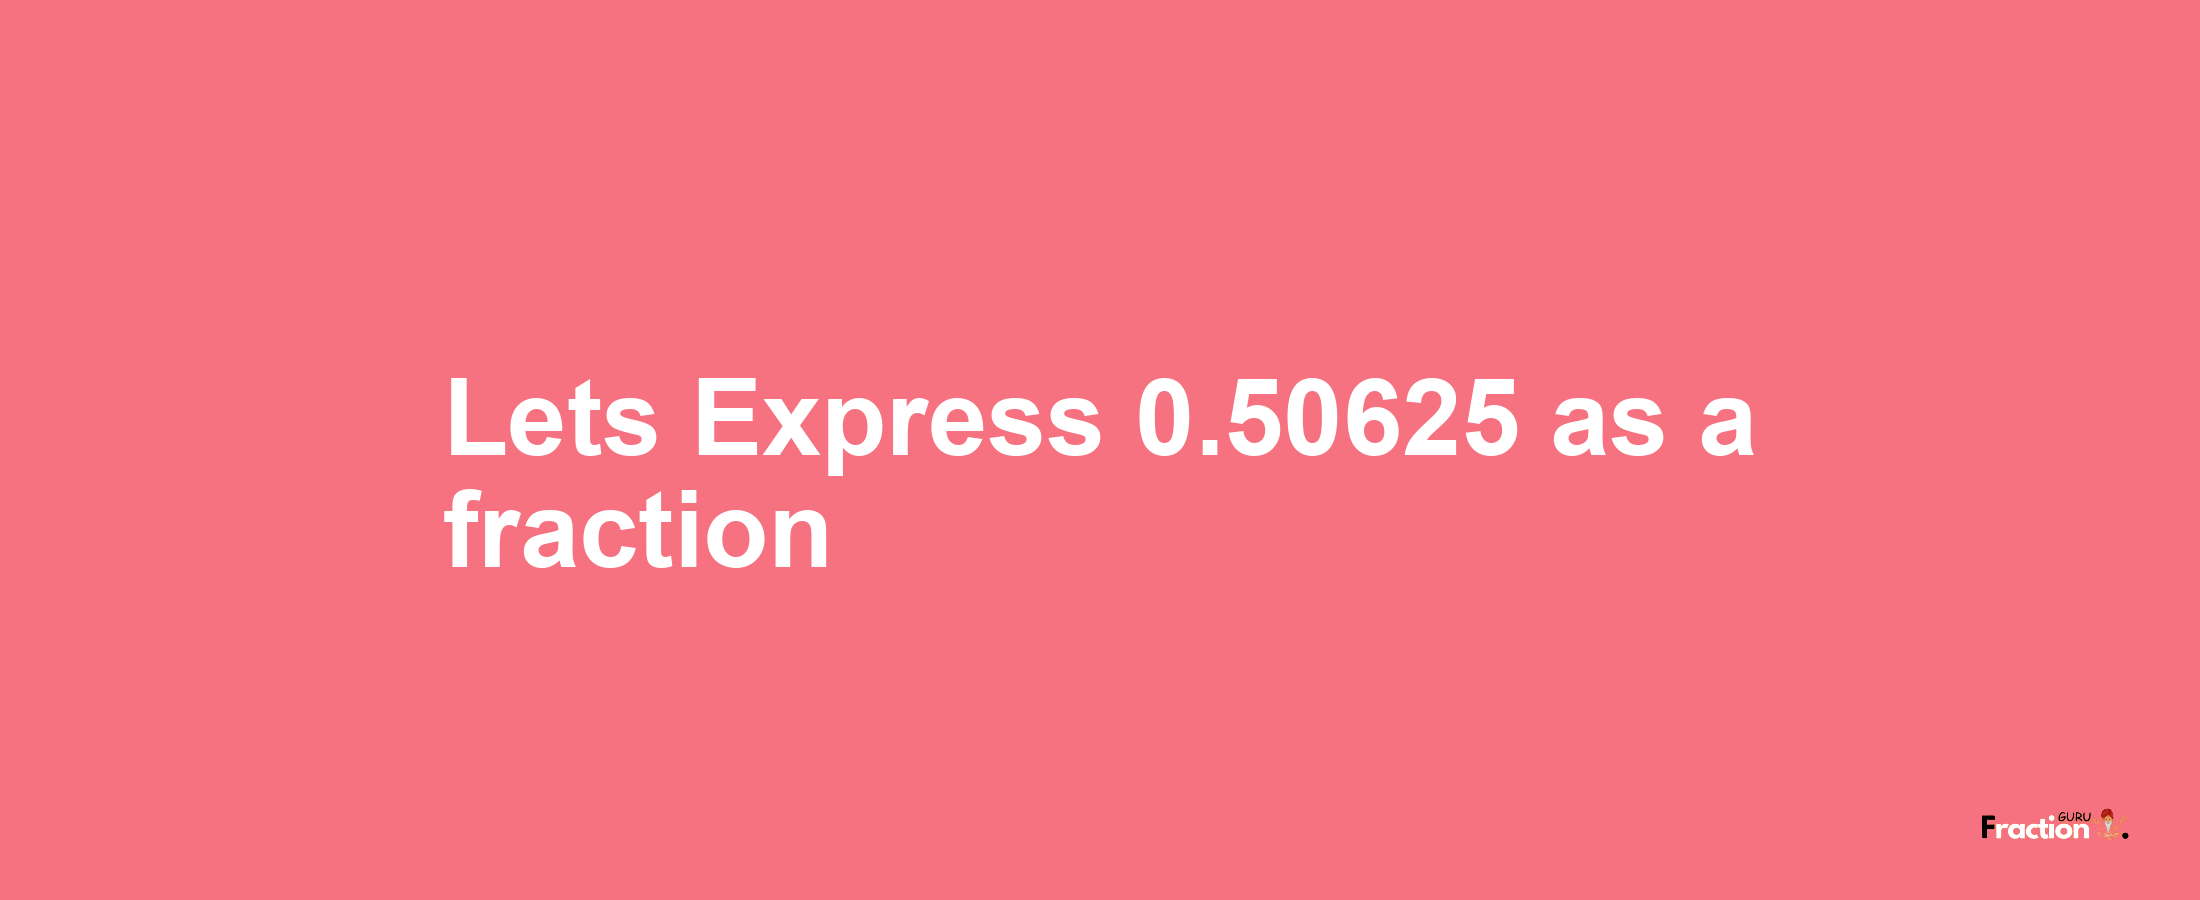 Lets Express 0.50625 as afraction